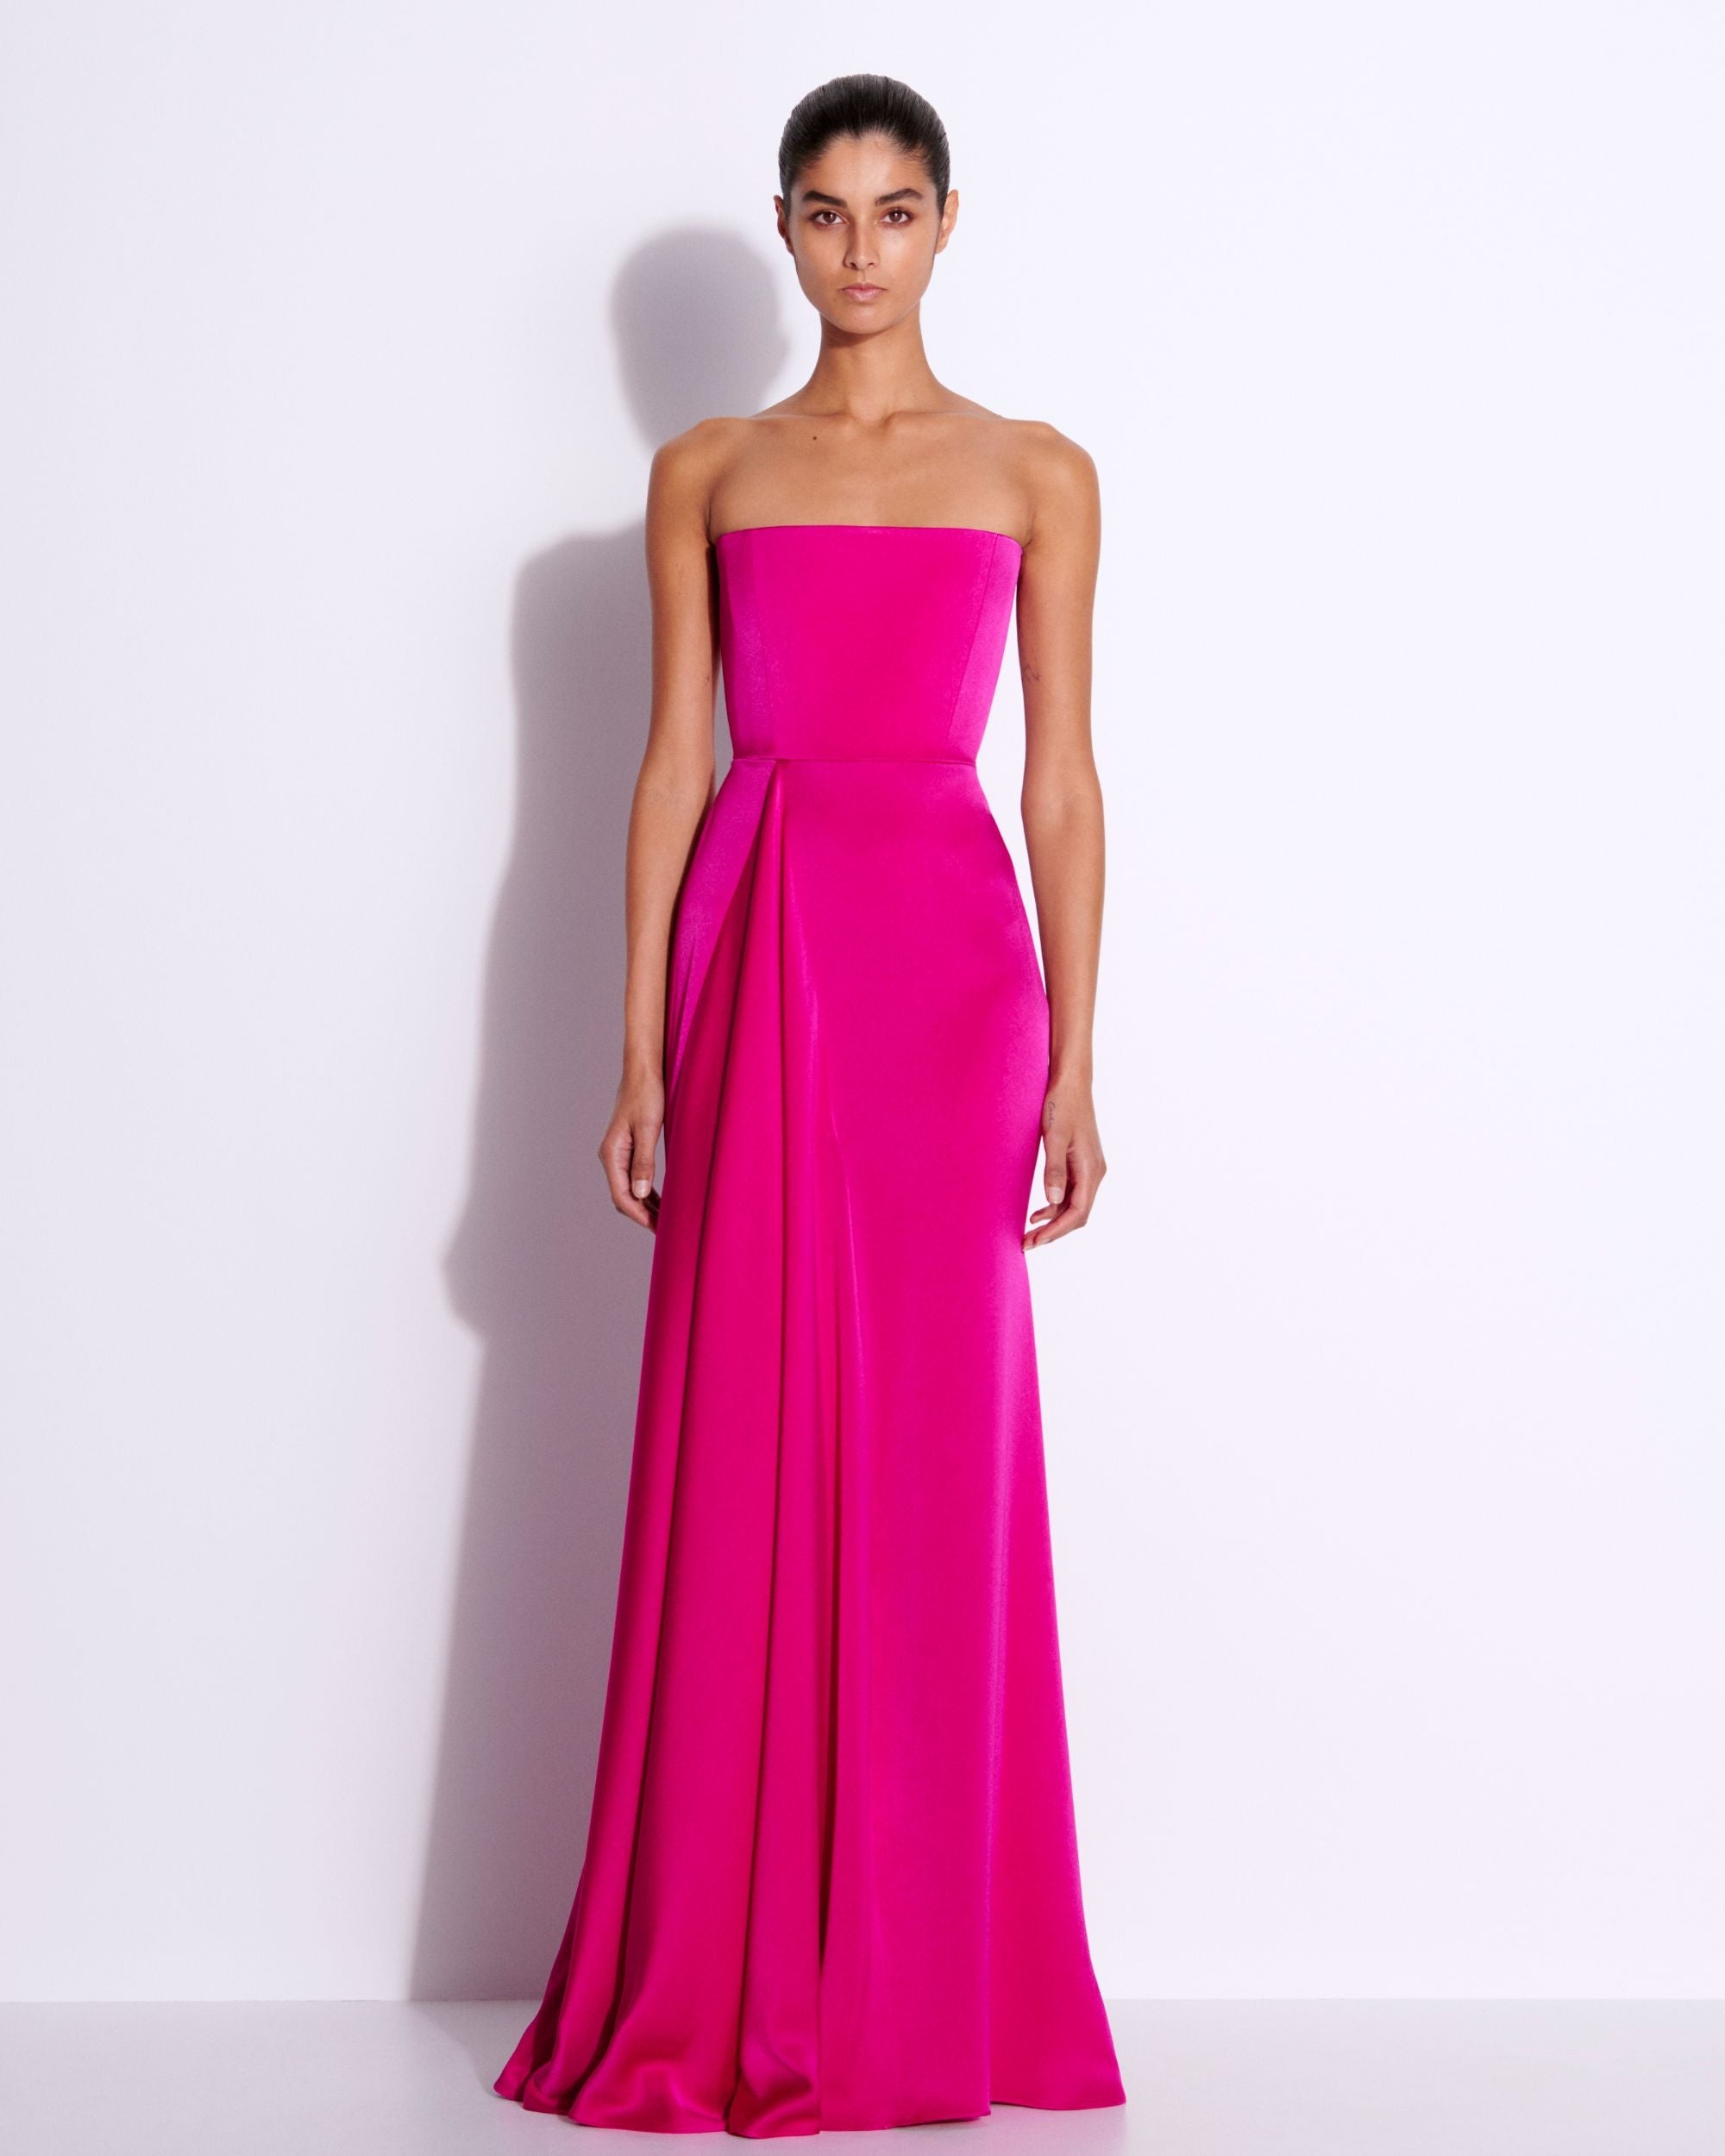 Strapless Gathered Drape Gown in Satin Crepe – Alex Perry